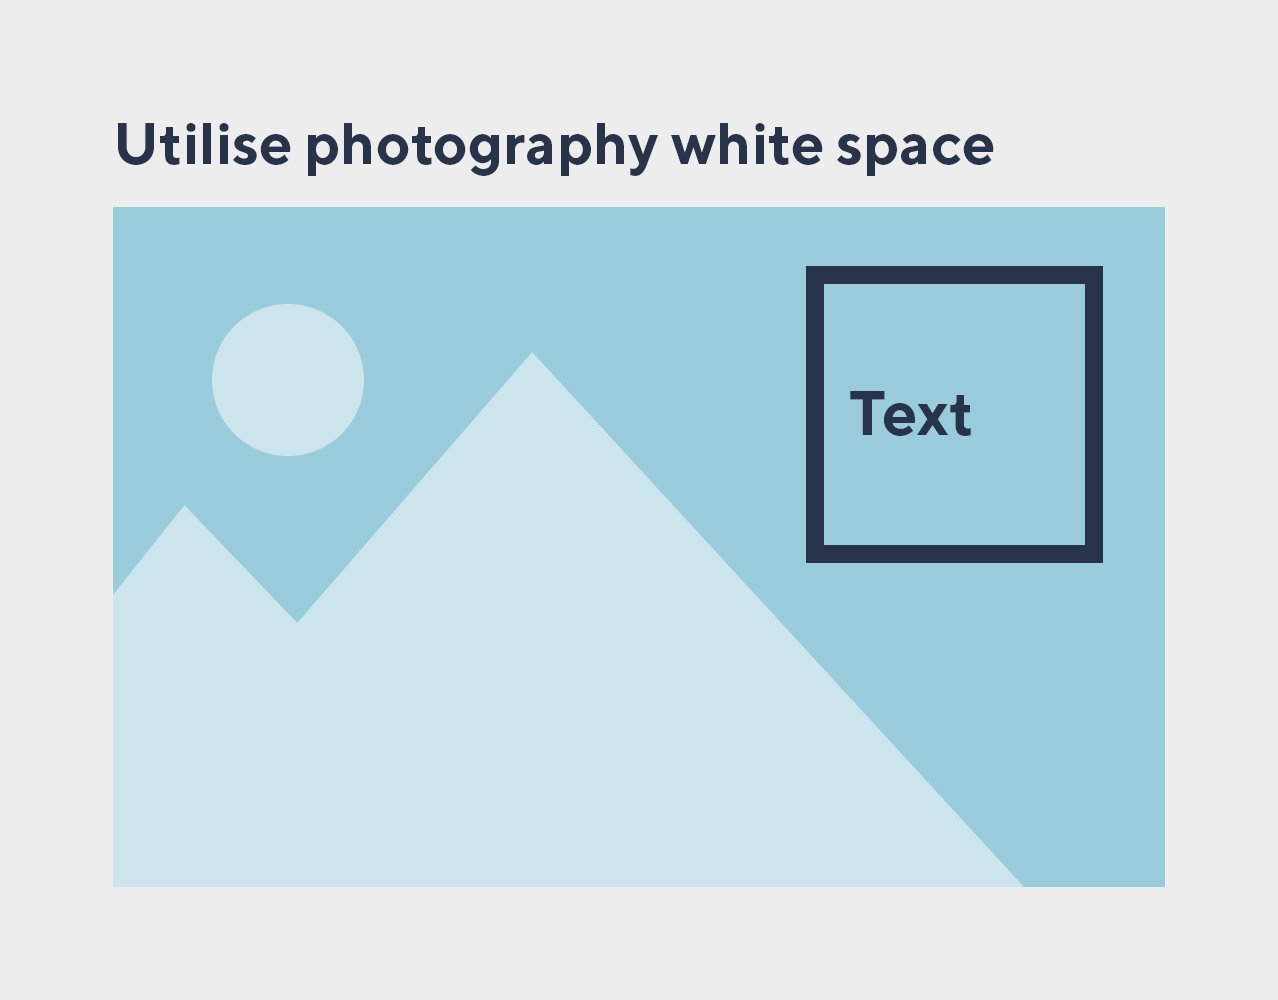 Leverage photography white space